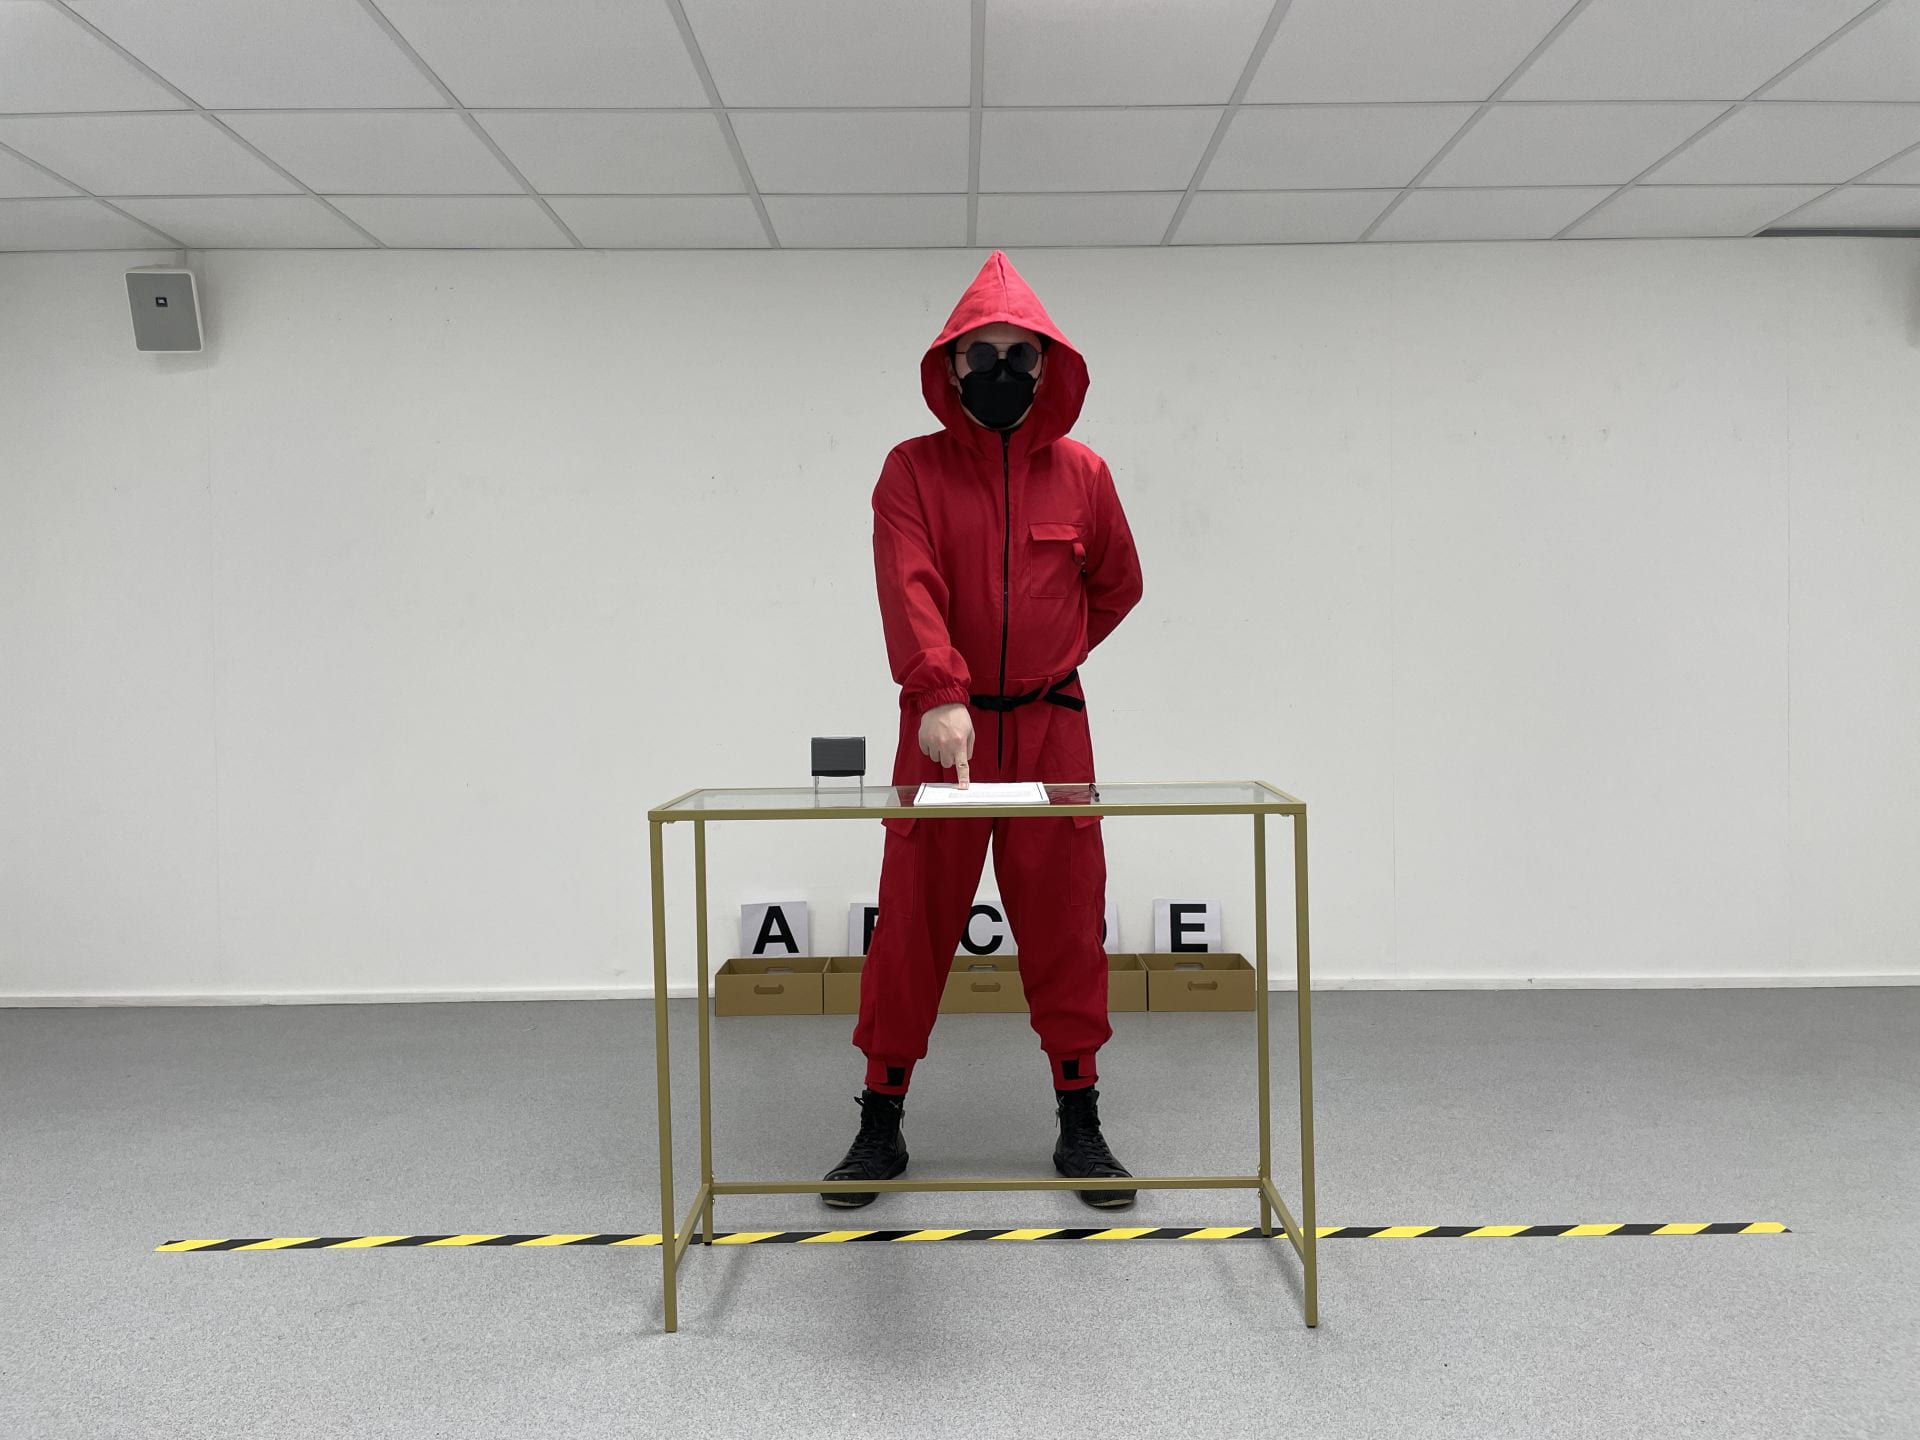 An image of a person in a red costume standing next to a glass table.